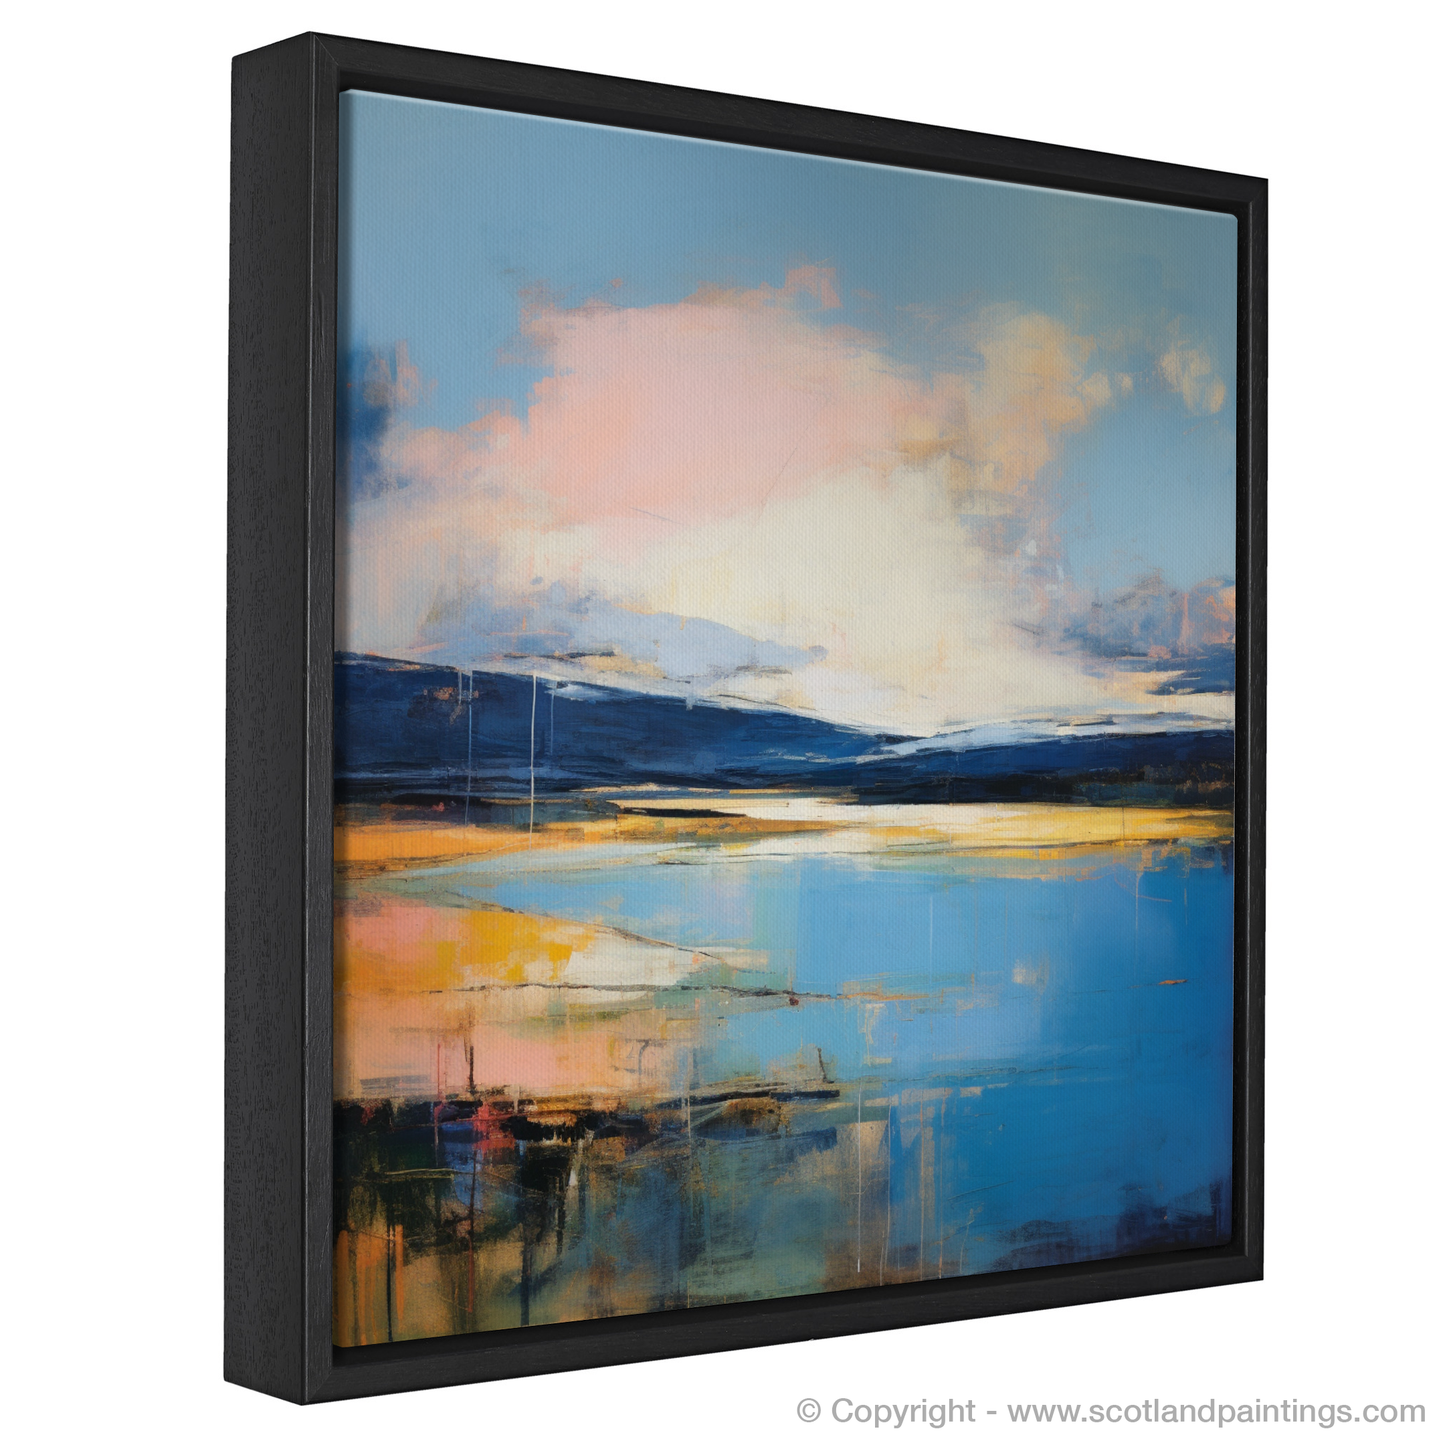 Painting and Art Print of A huge sky above Loch Lomond entitled "Awe-inspiring Loch Lomond Skies in Abstract Impressionism".